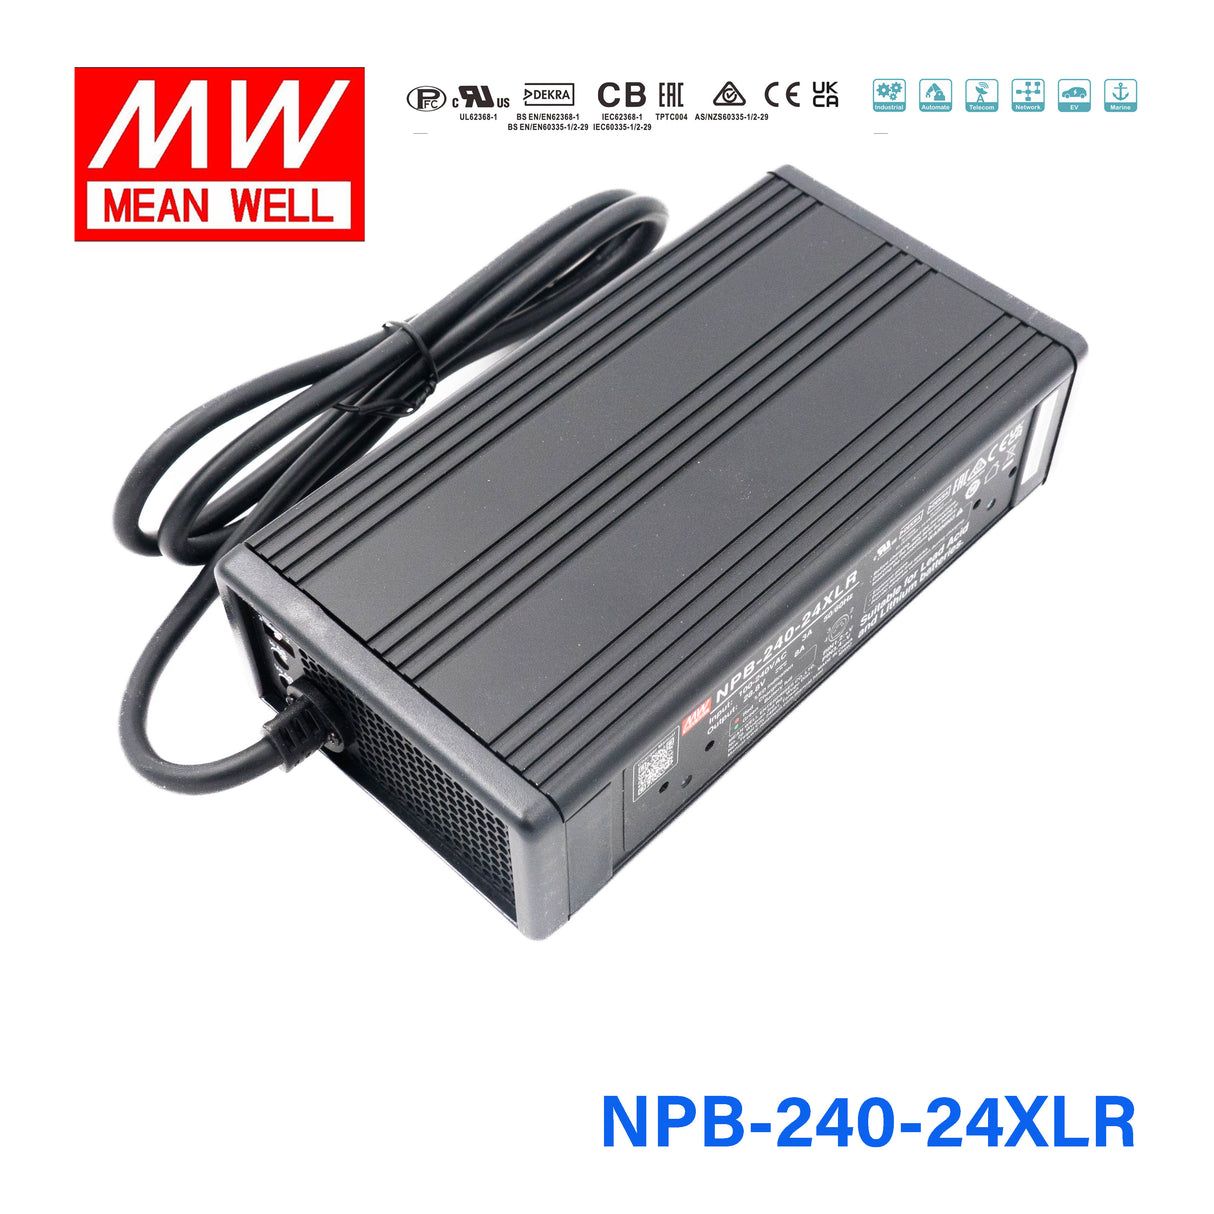 Mean Well NPB-240-24XLR Battery Charger 240W 24V 3 Pin Power Pin